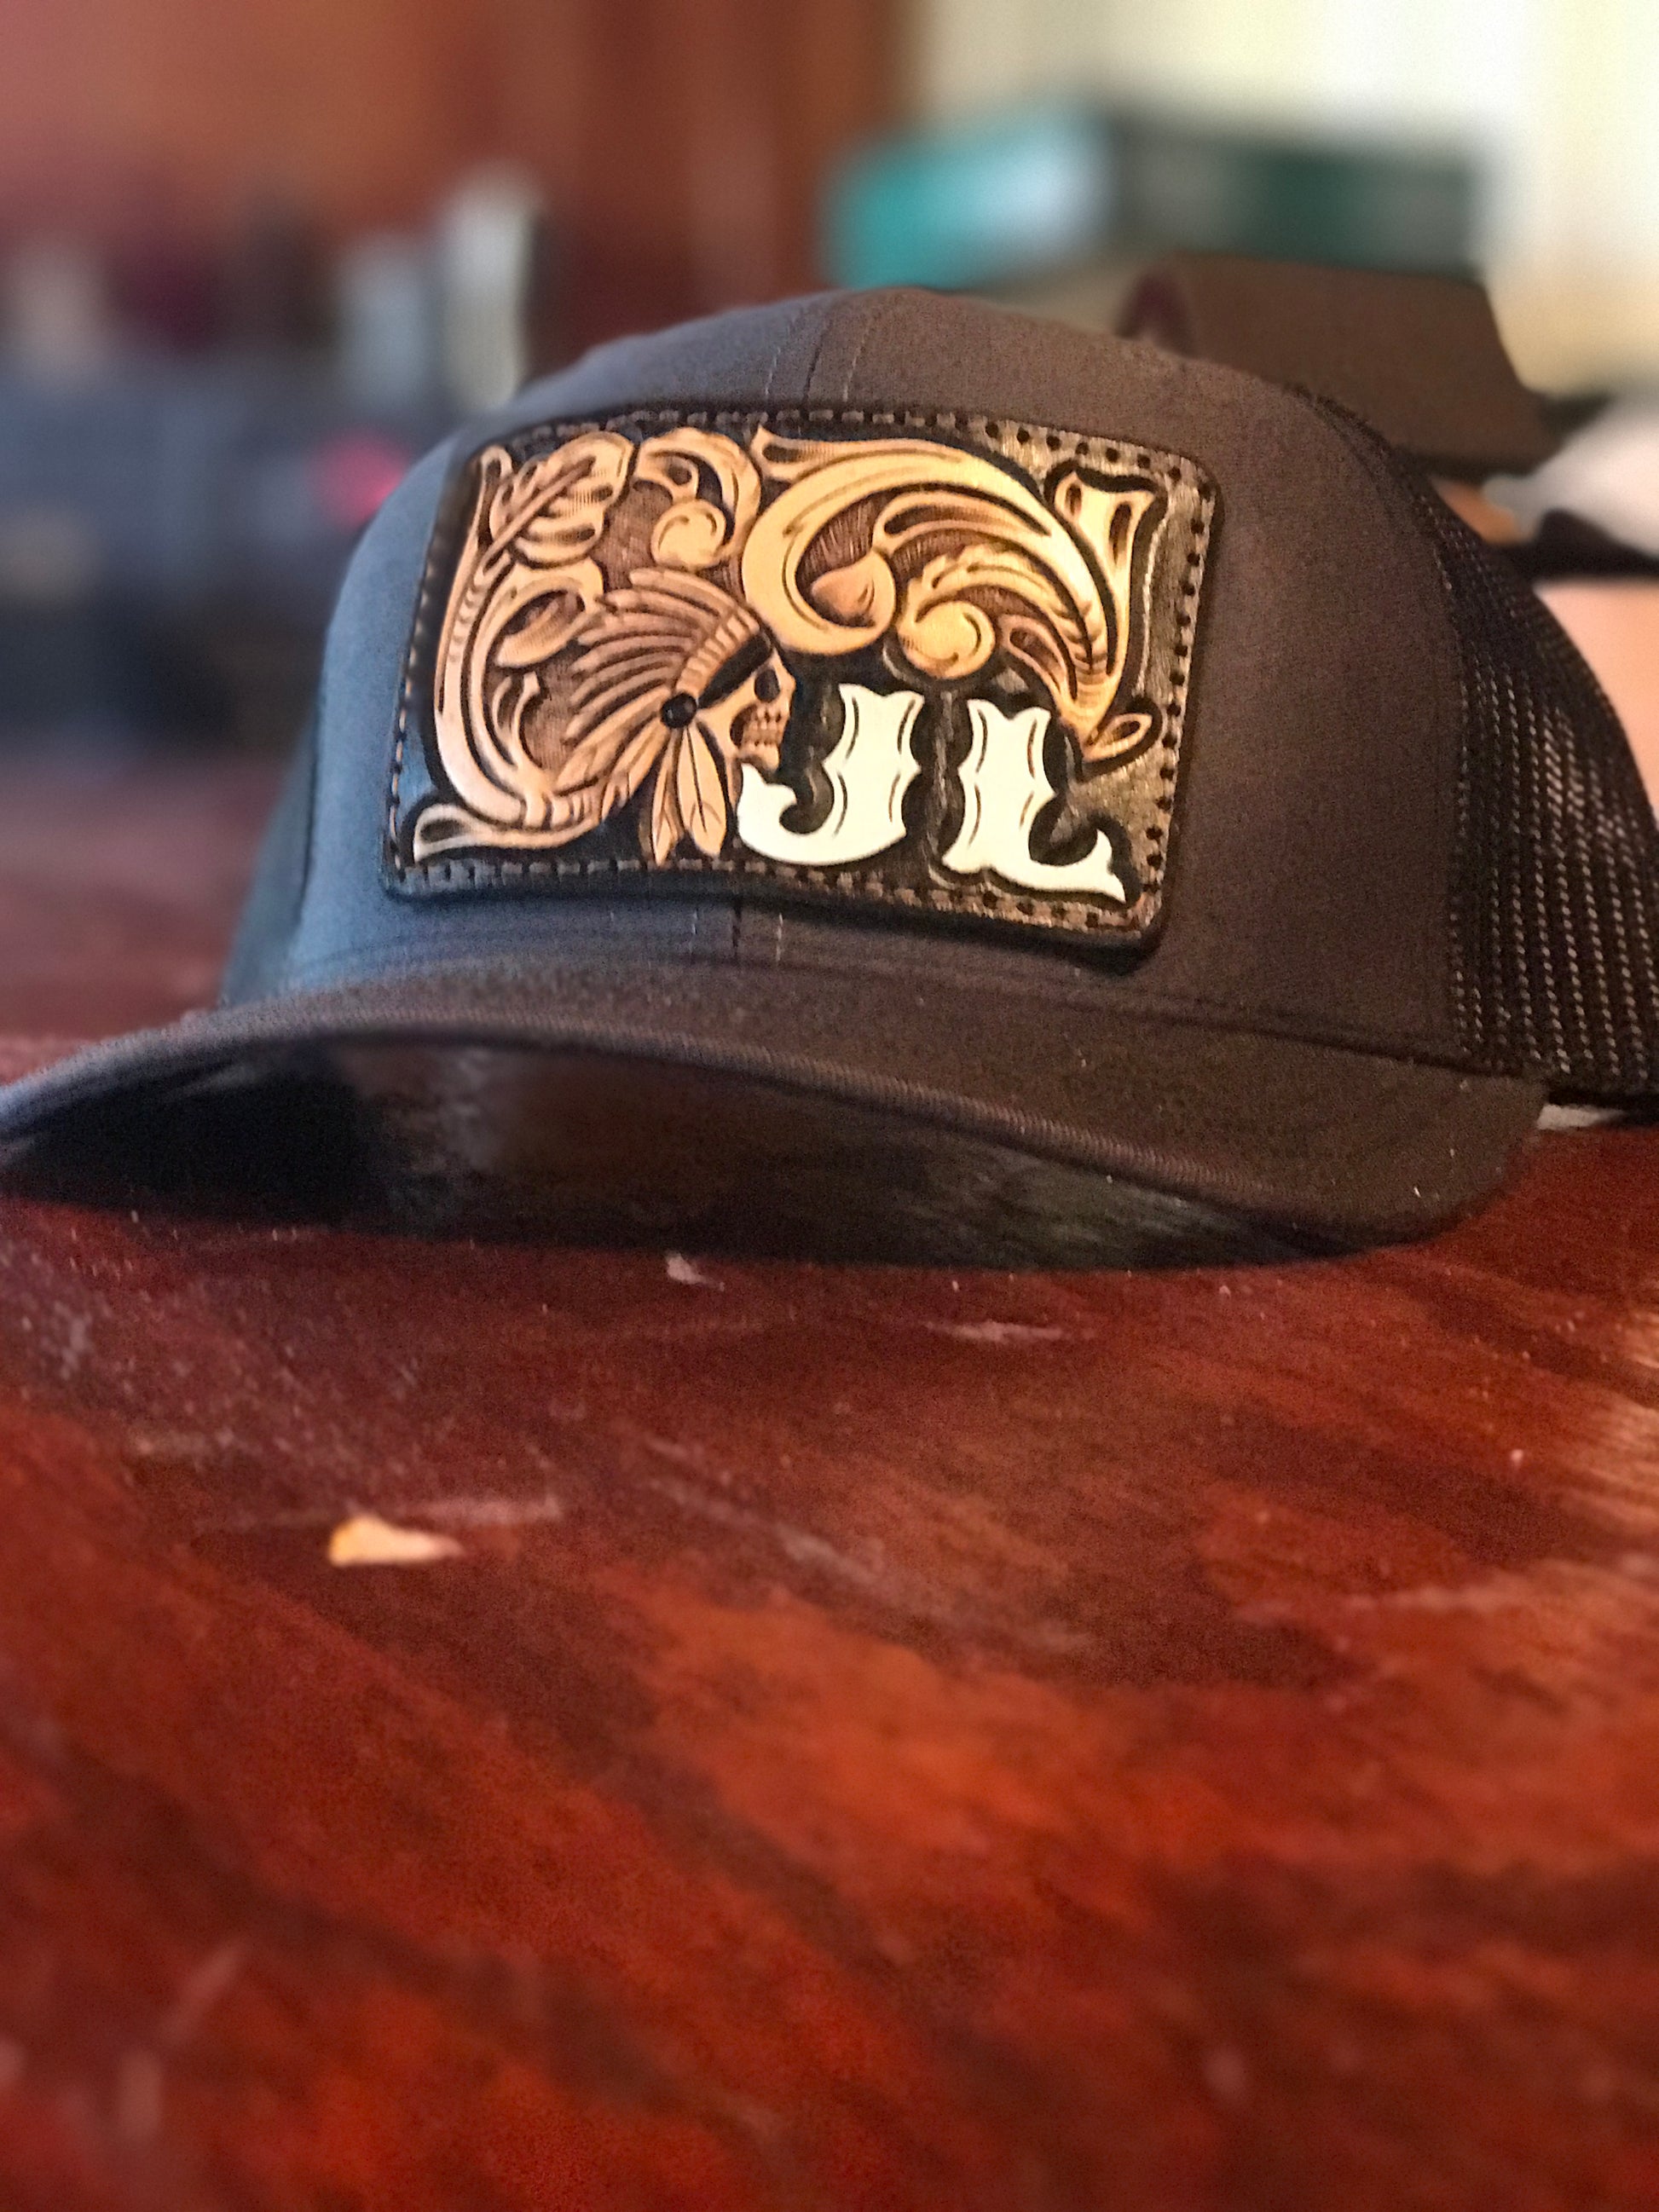 Making a Leather Patch for a Trucker Hat : 10 Steps (with Pictures